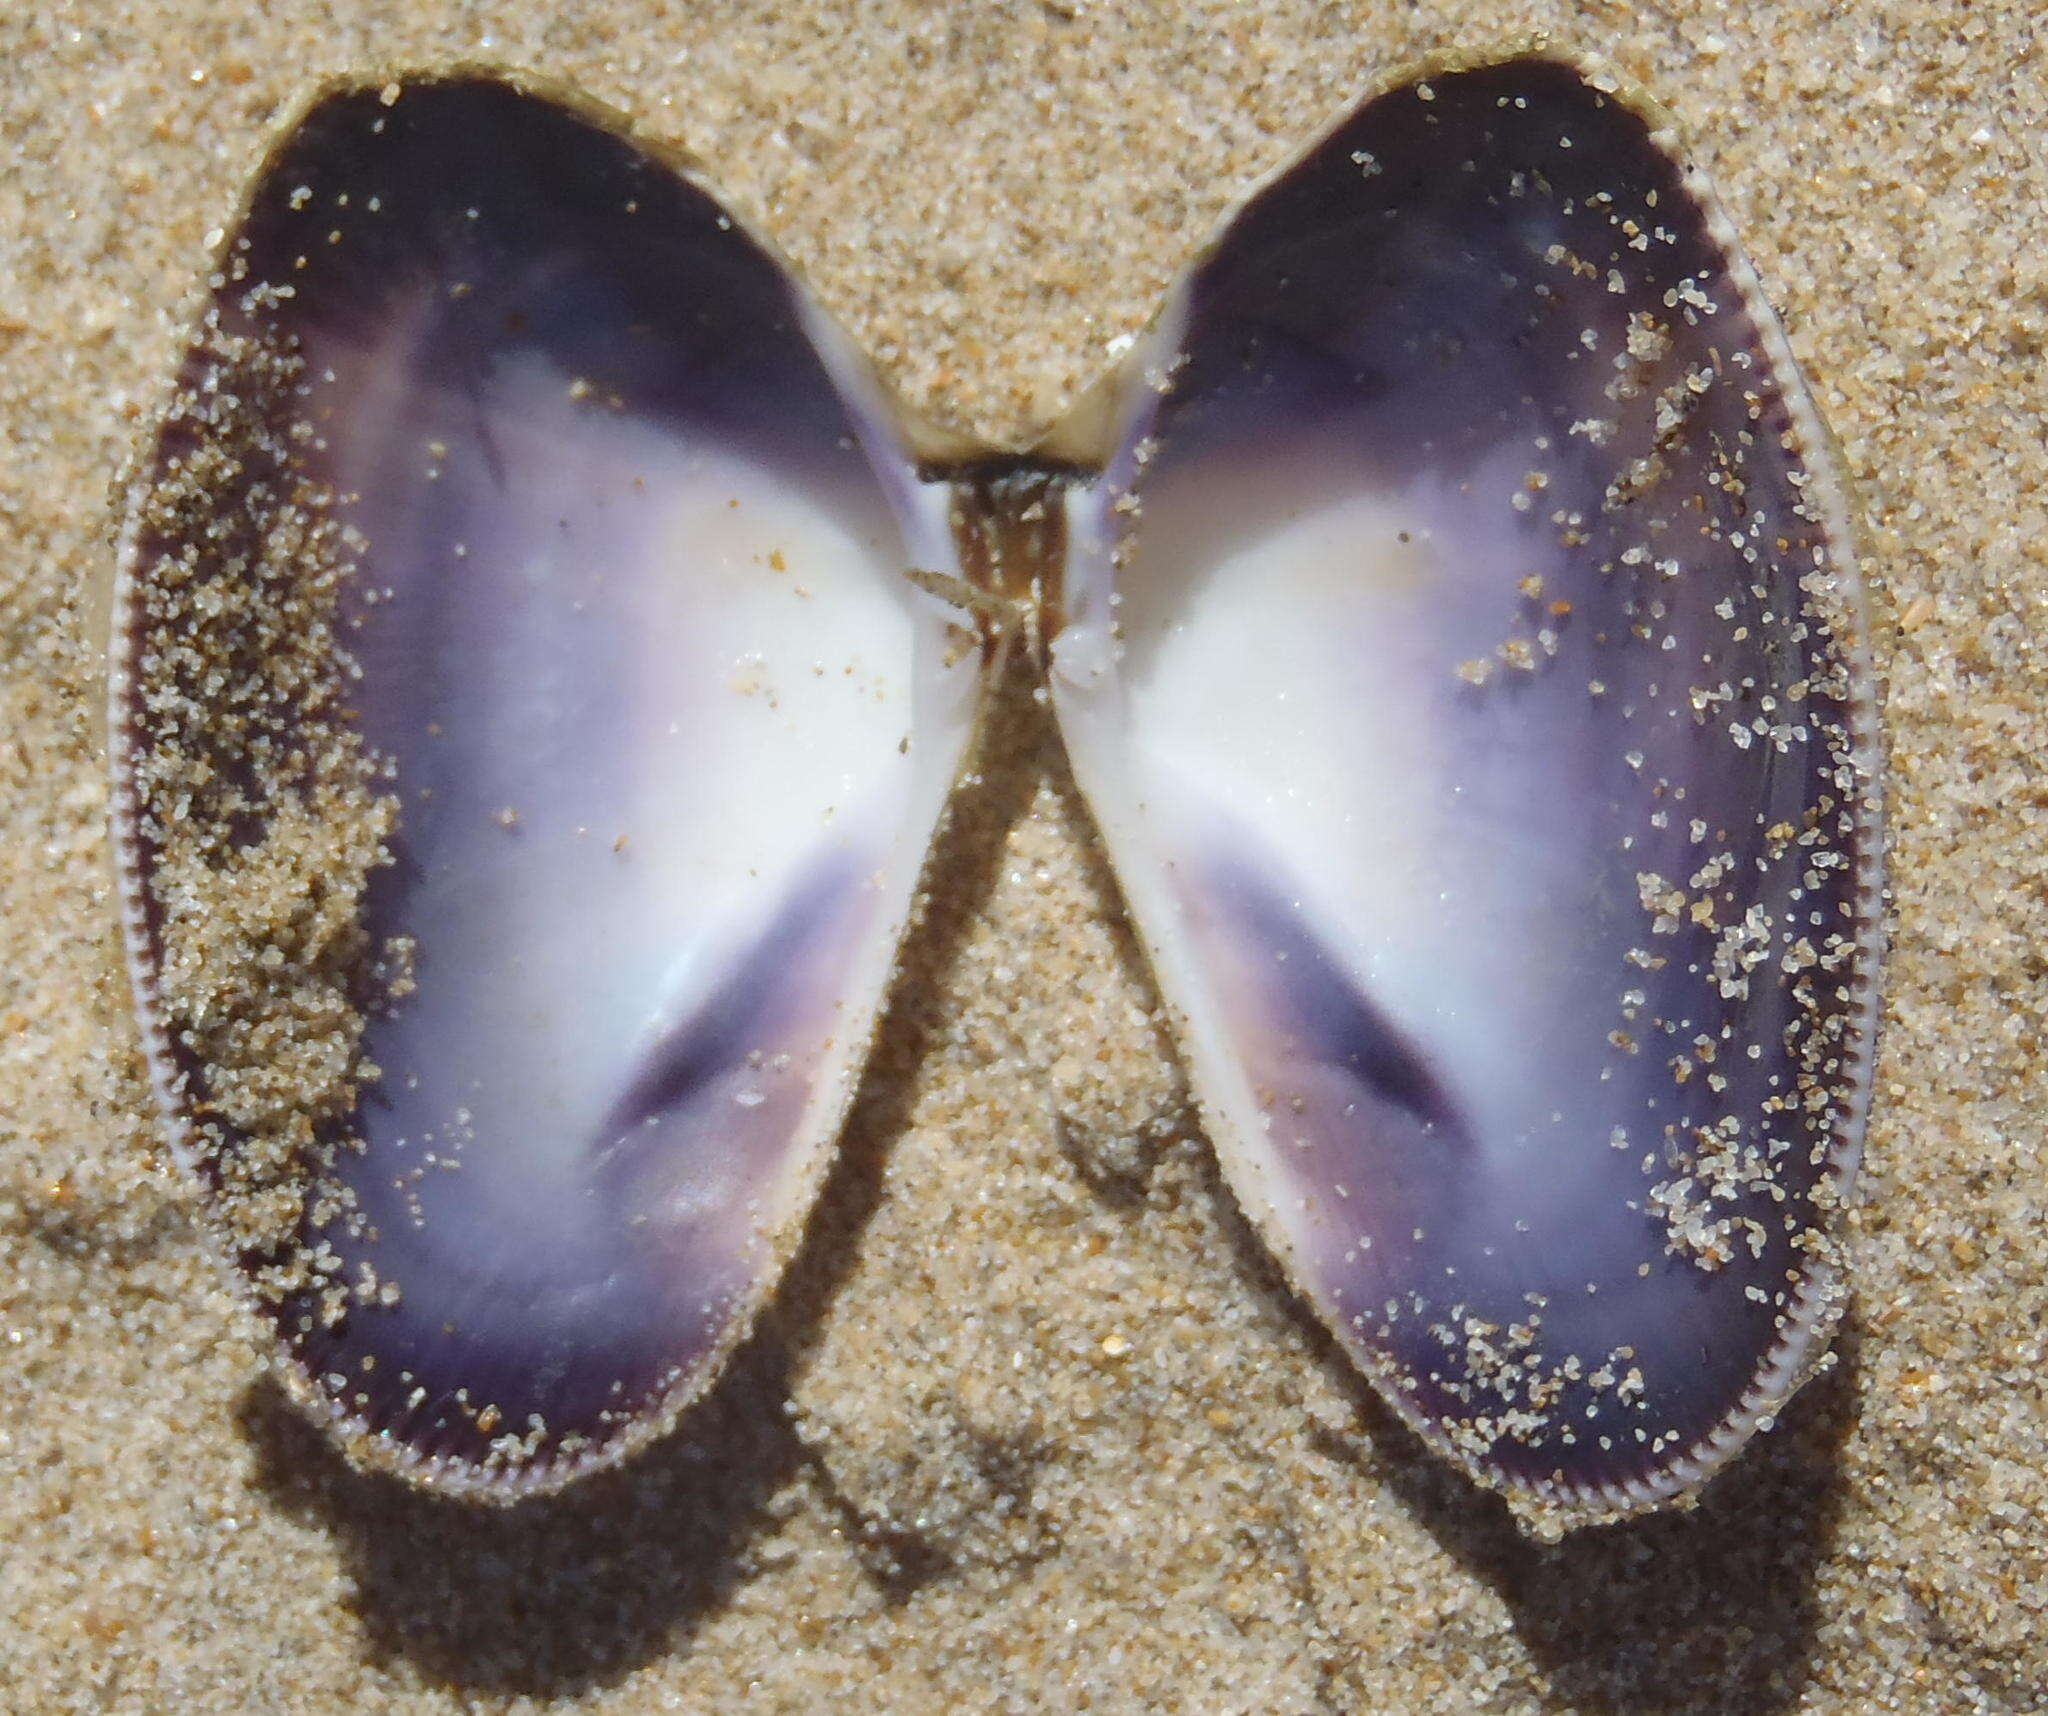 Image of giant South African wedge clam